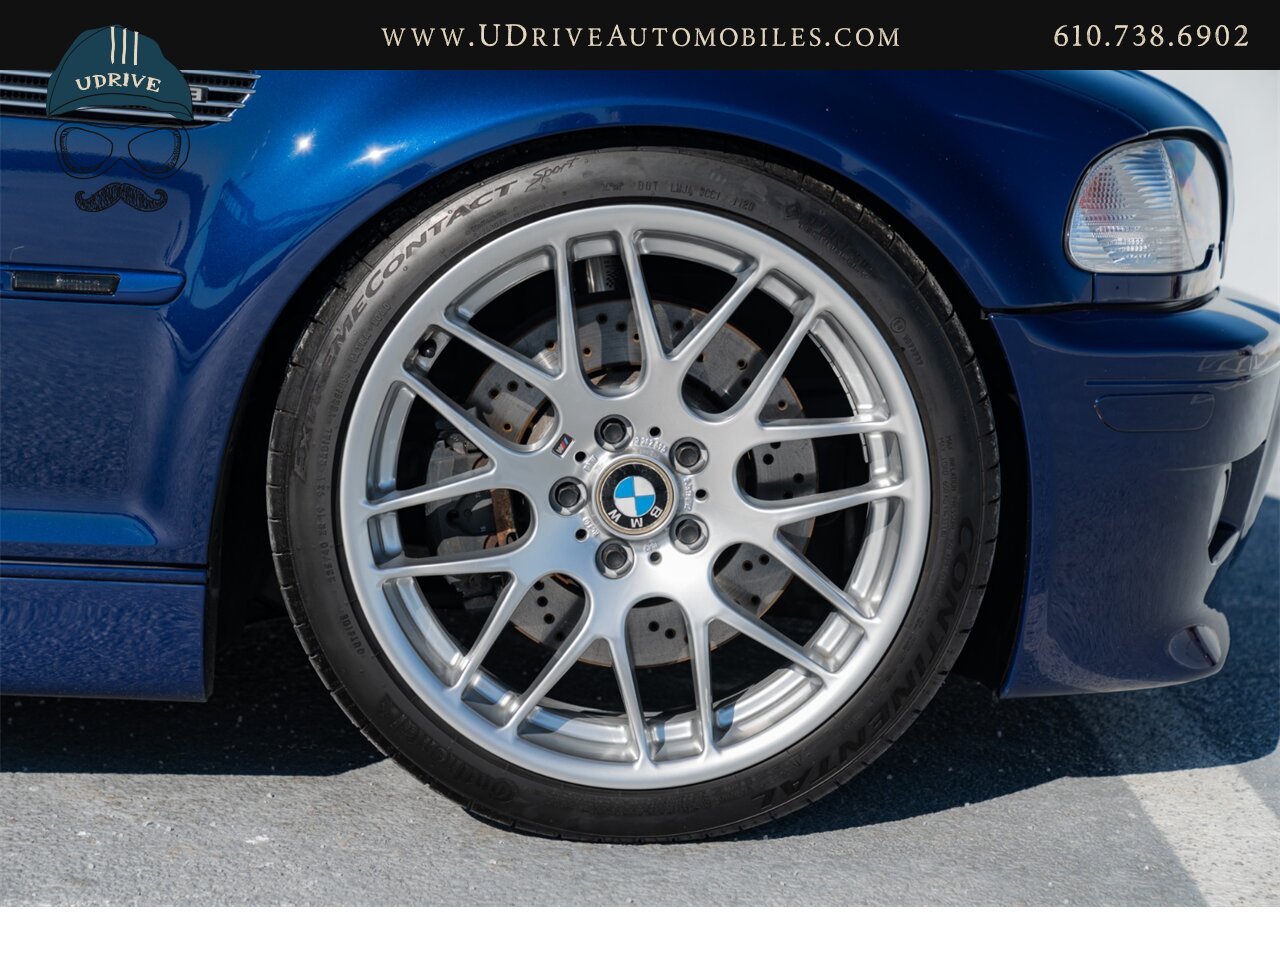 2006 BMW M3 E46 6 Speed Manual Competition Pkg Interlagos Blue  Cinnamon Leather - Photo 54 - West Chester, PA 19382